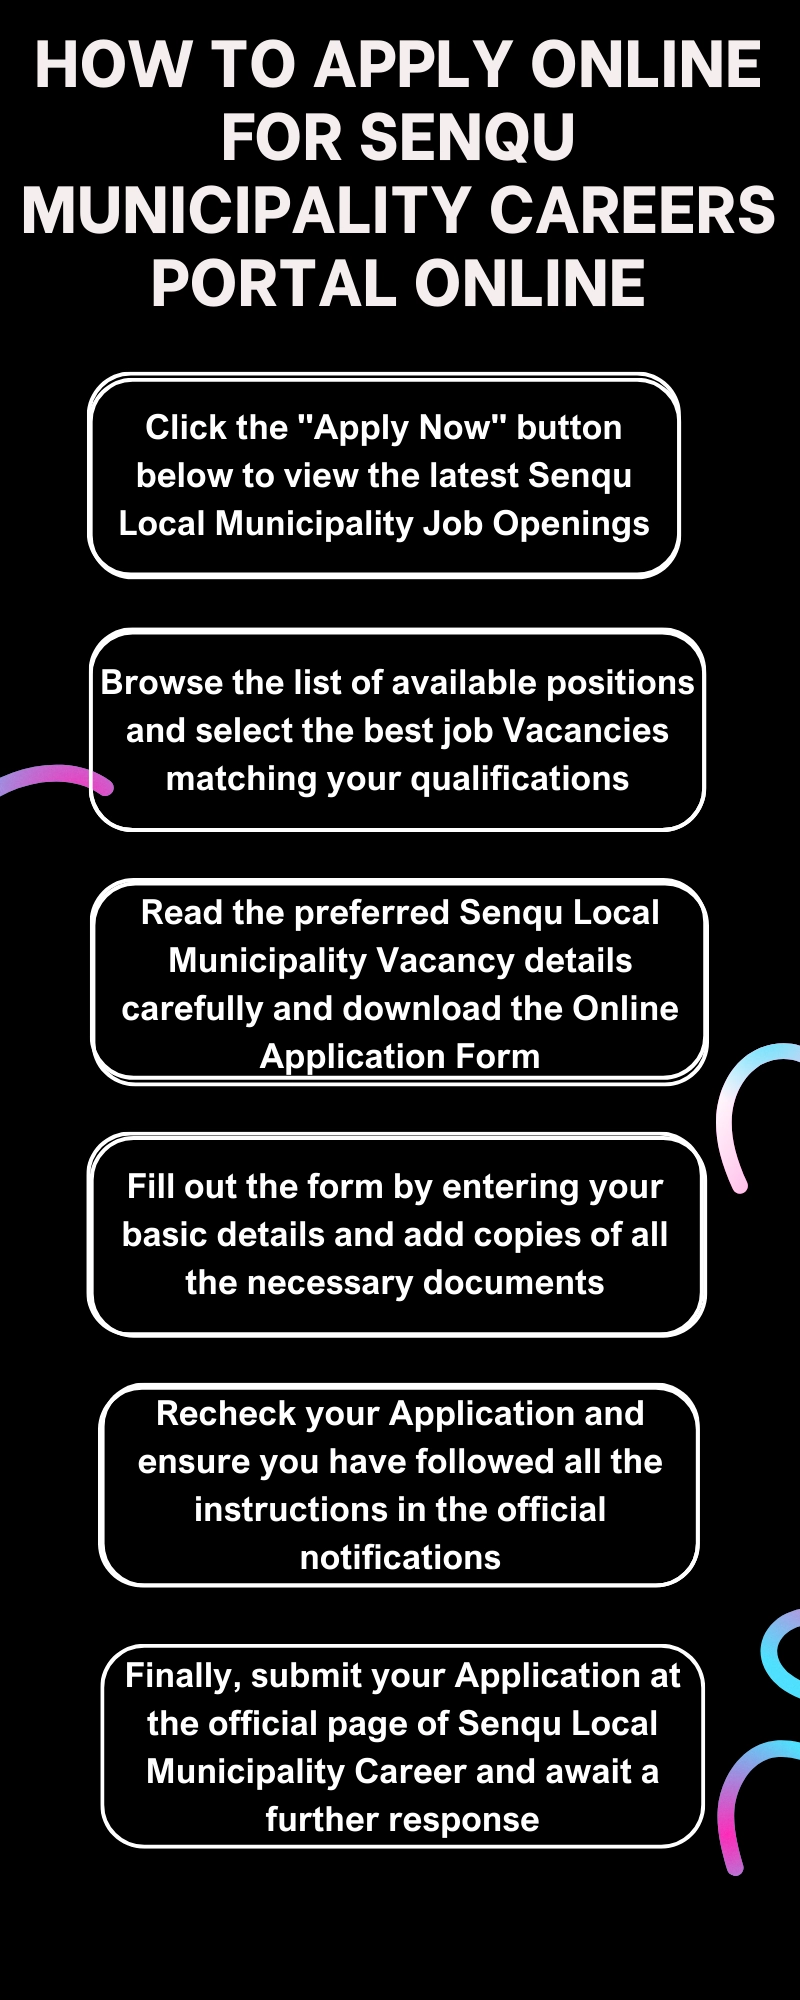 How to Apply online for Senqu Municipality Careers Portal Online